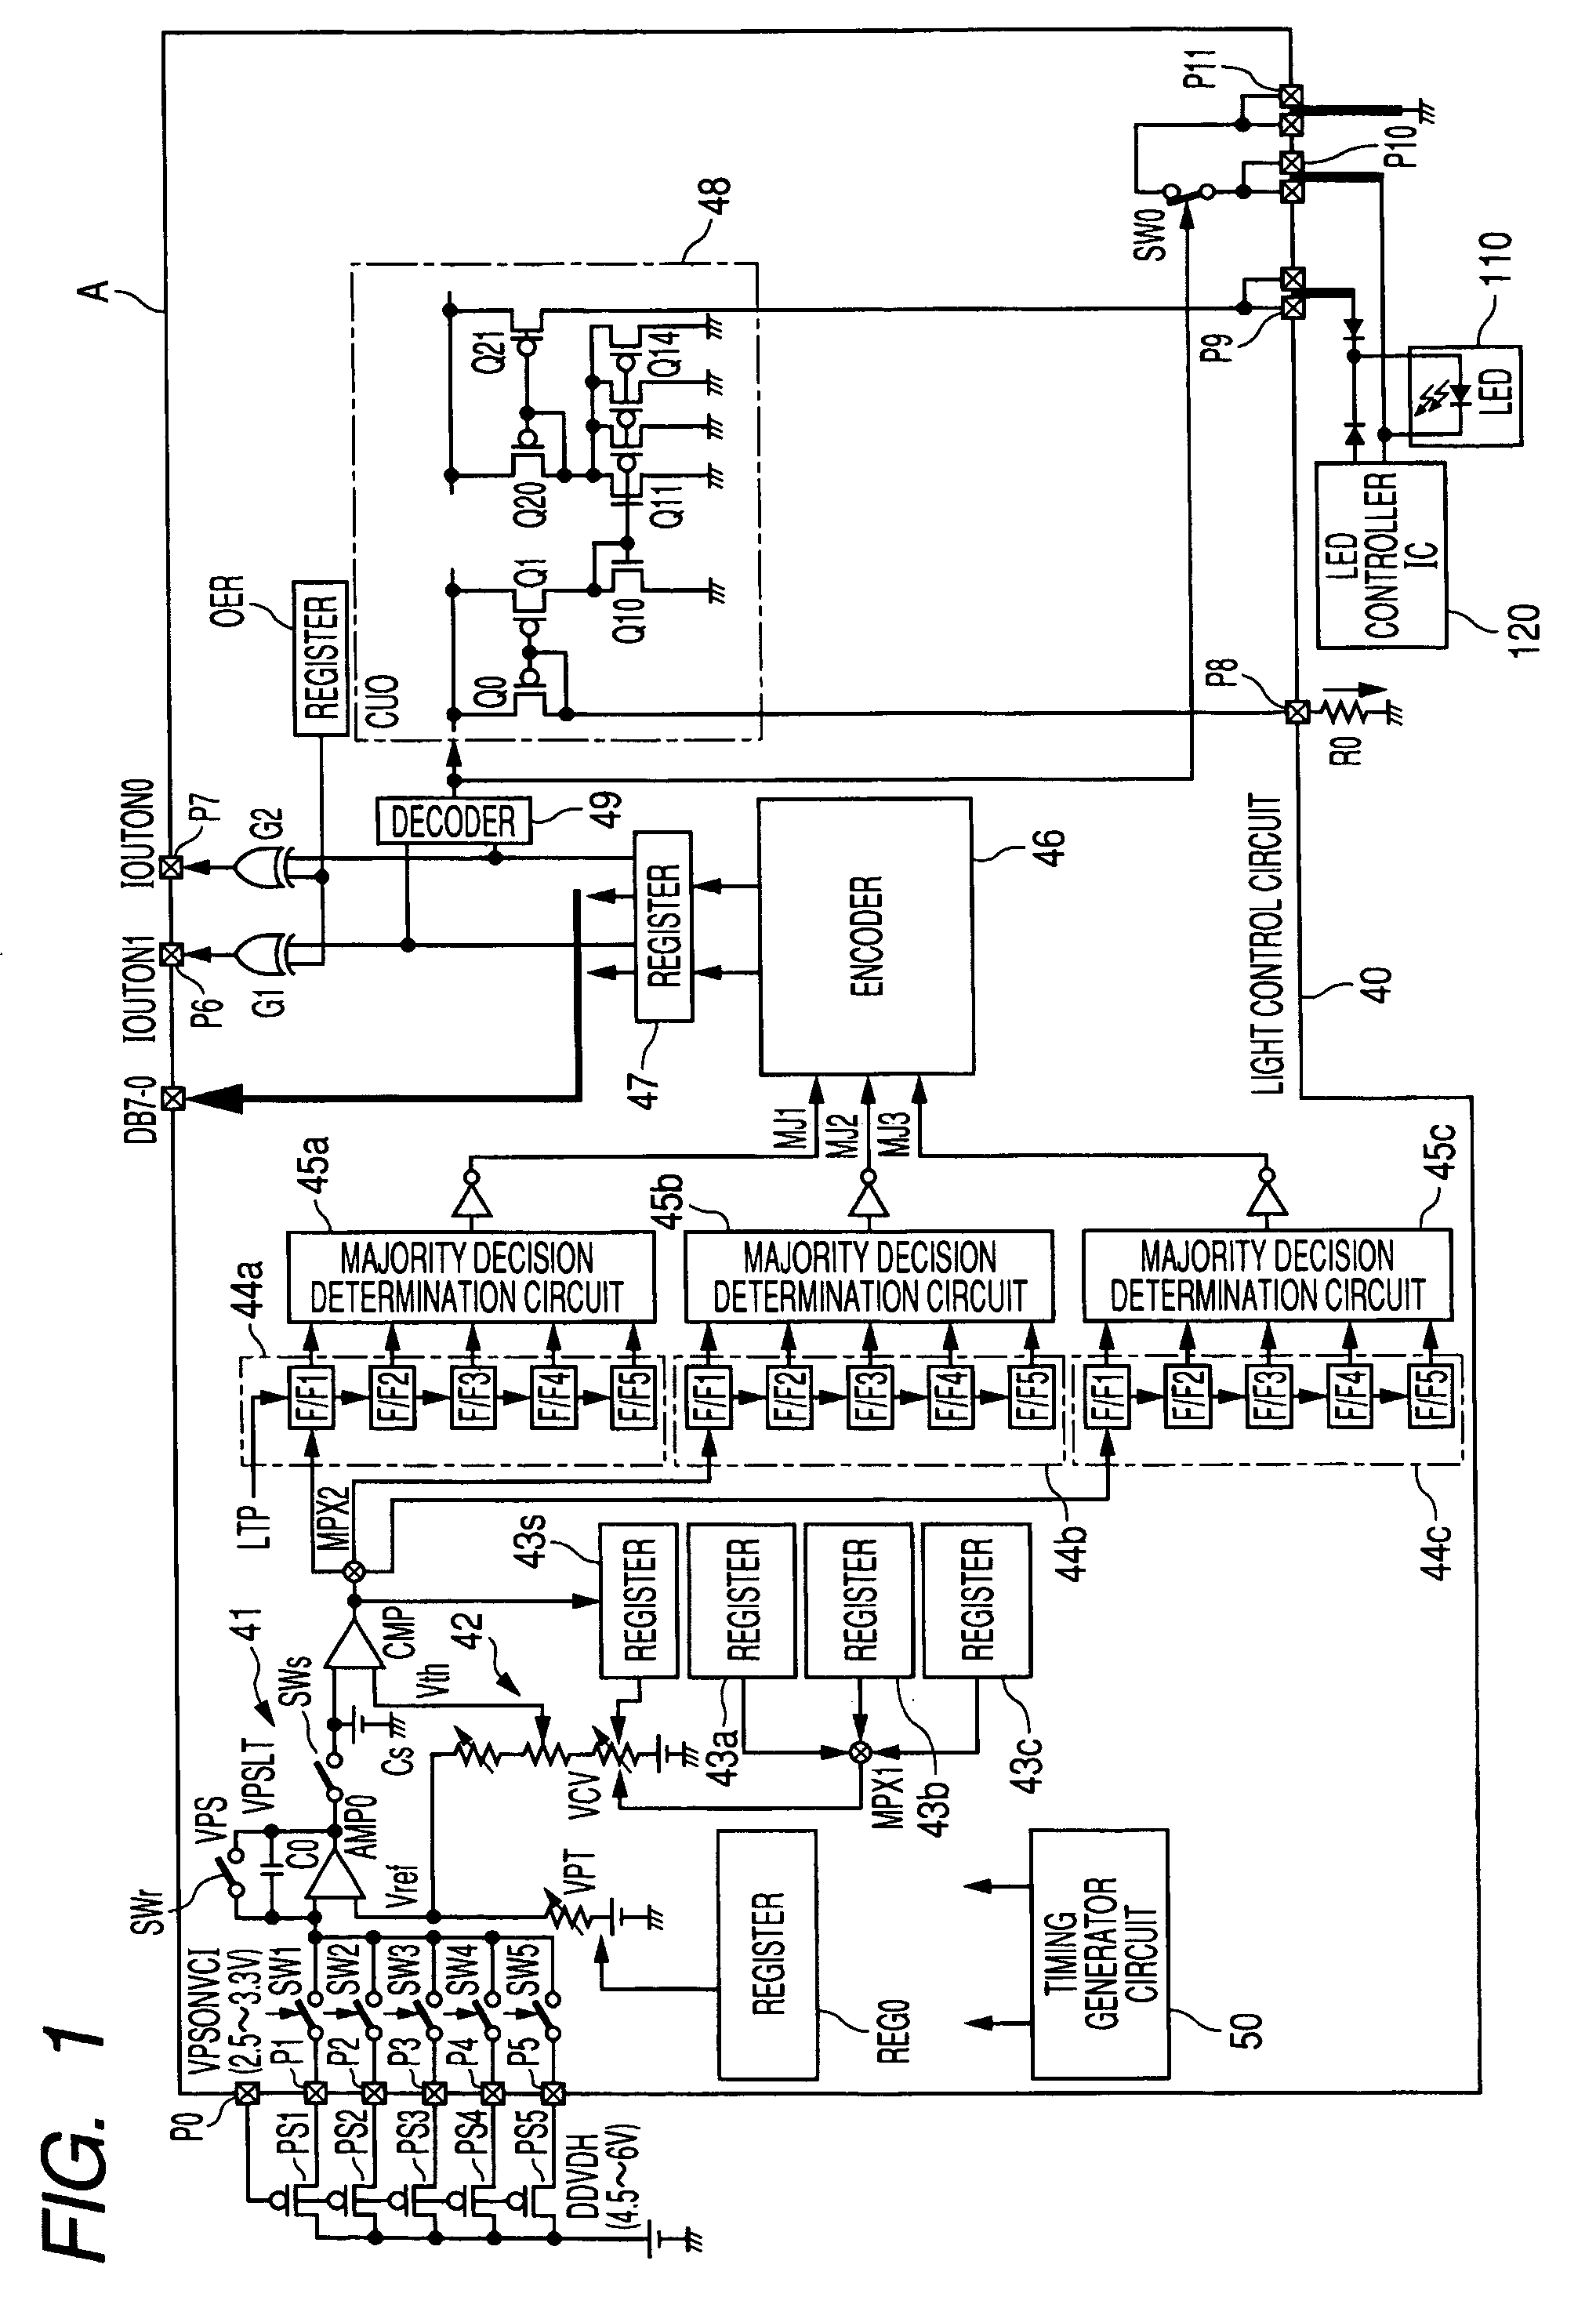 Light control circuit and a liquid-crystal-display control drive device